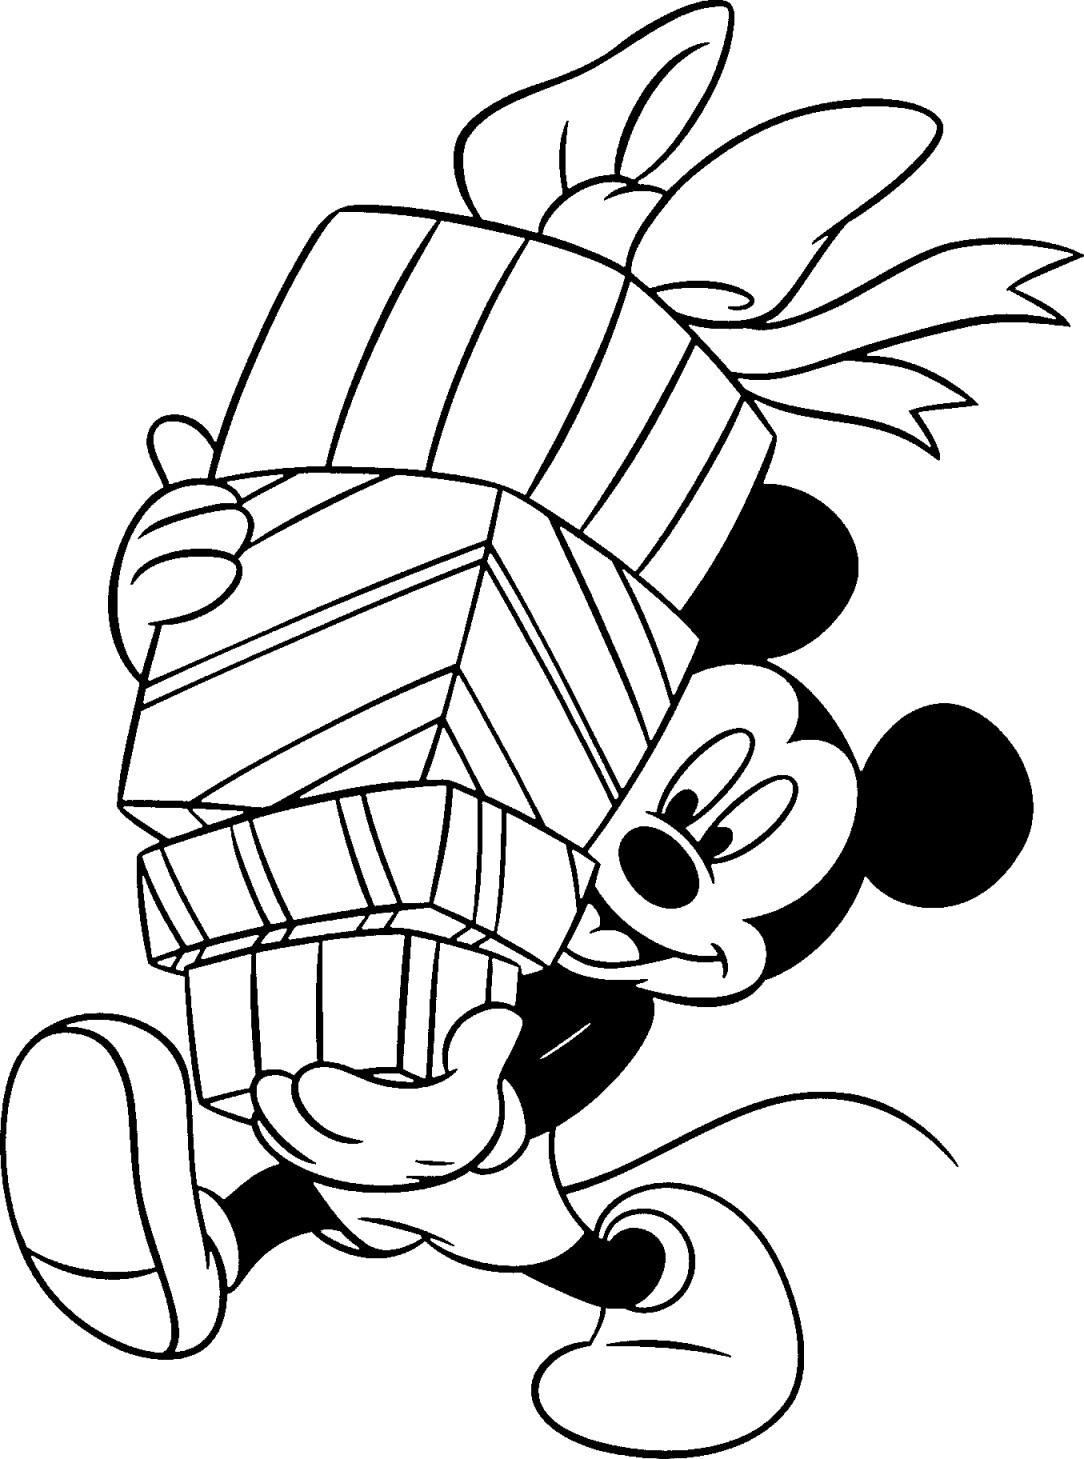 Printable Holiday Coloring Pages
 Free Disney Christmas Printable Coloring Pages for Kids